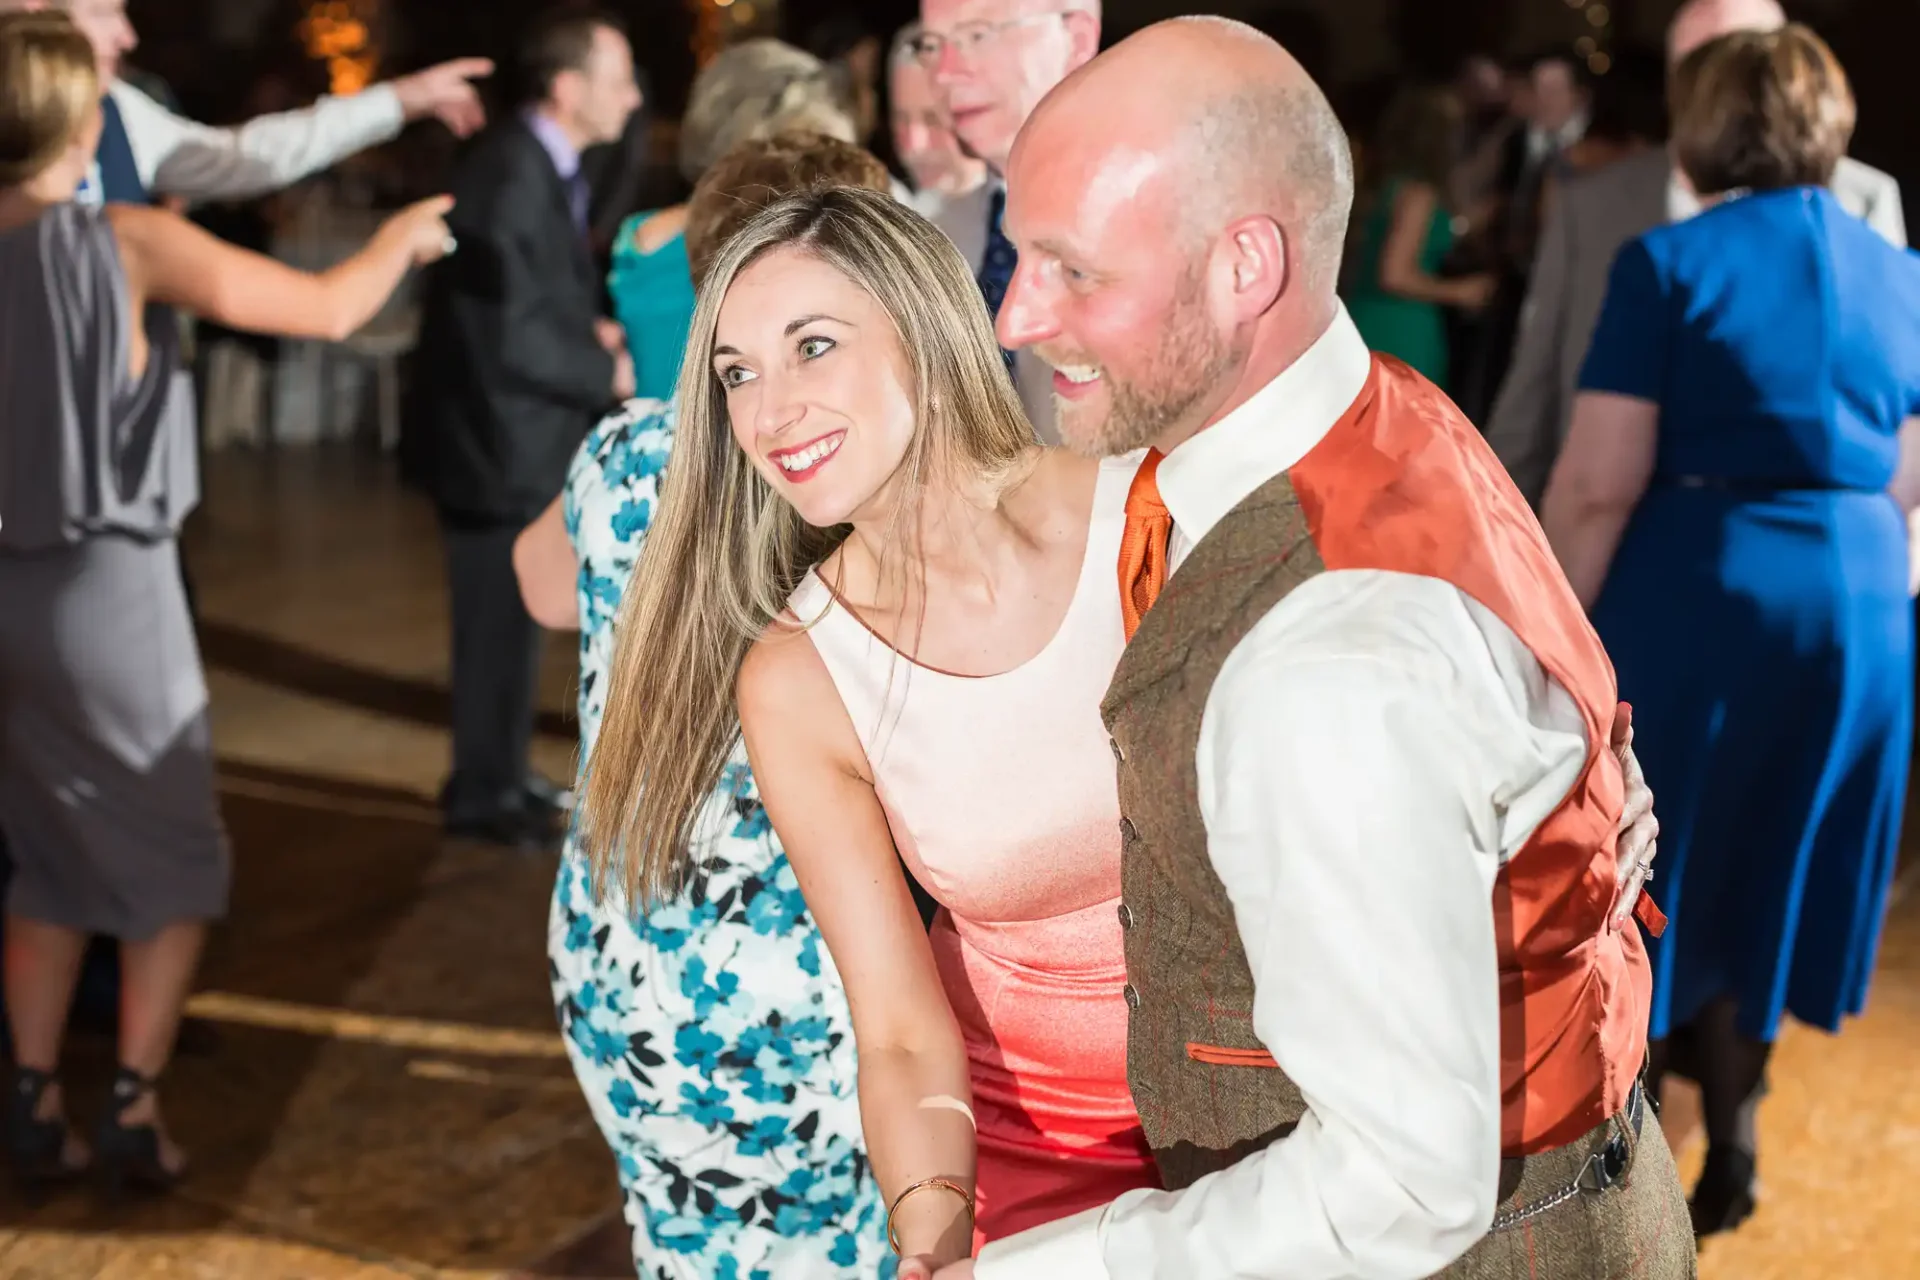 A couple smiles while dancing at a lively wedding reception, surrounded by other guests. the man wears a vest and the woman a sleeveless dress.